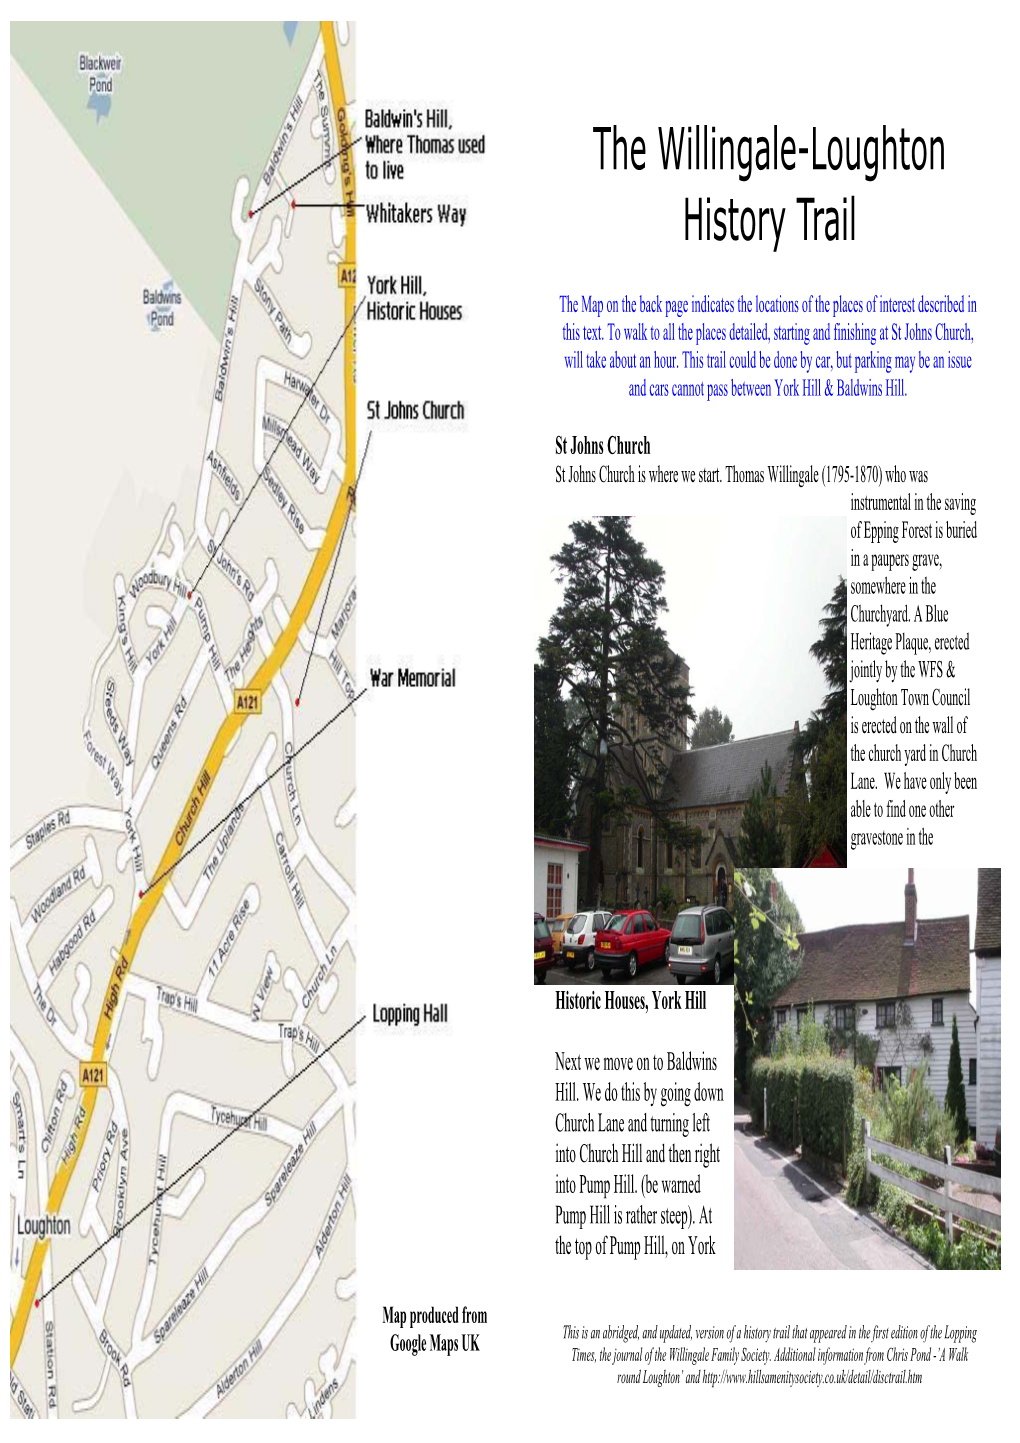 The Willingale-Loughton History Trail